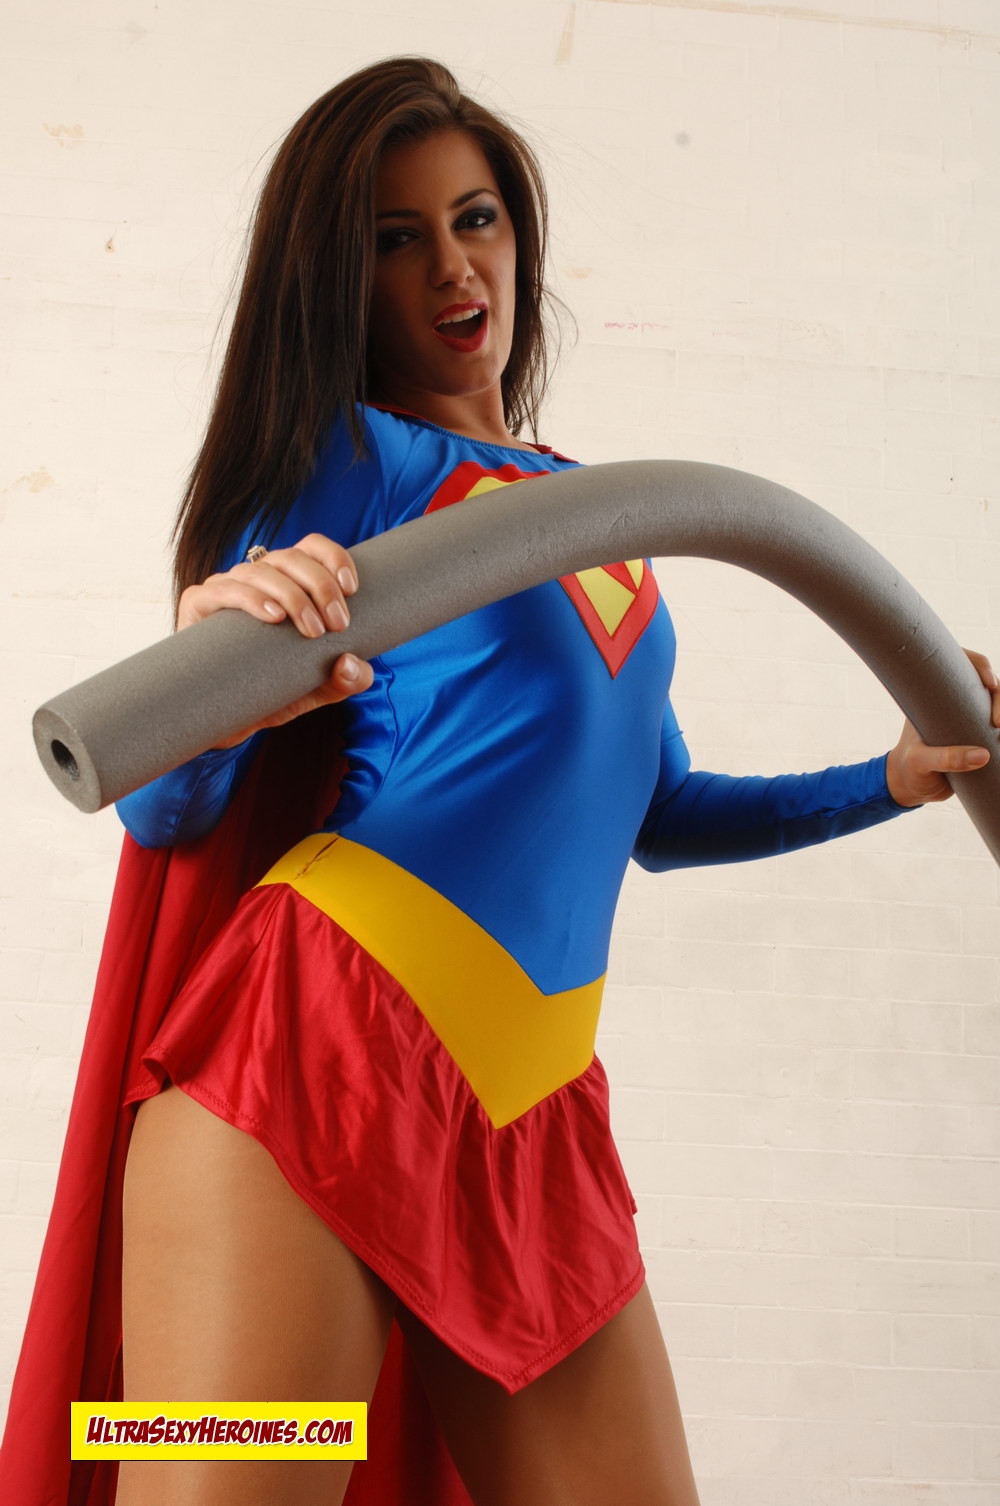 [UltraSexyHeroines] Super Heroine Cosplay Nude - Holly 76